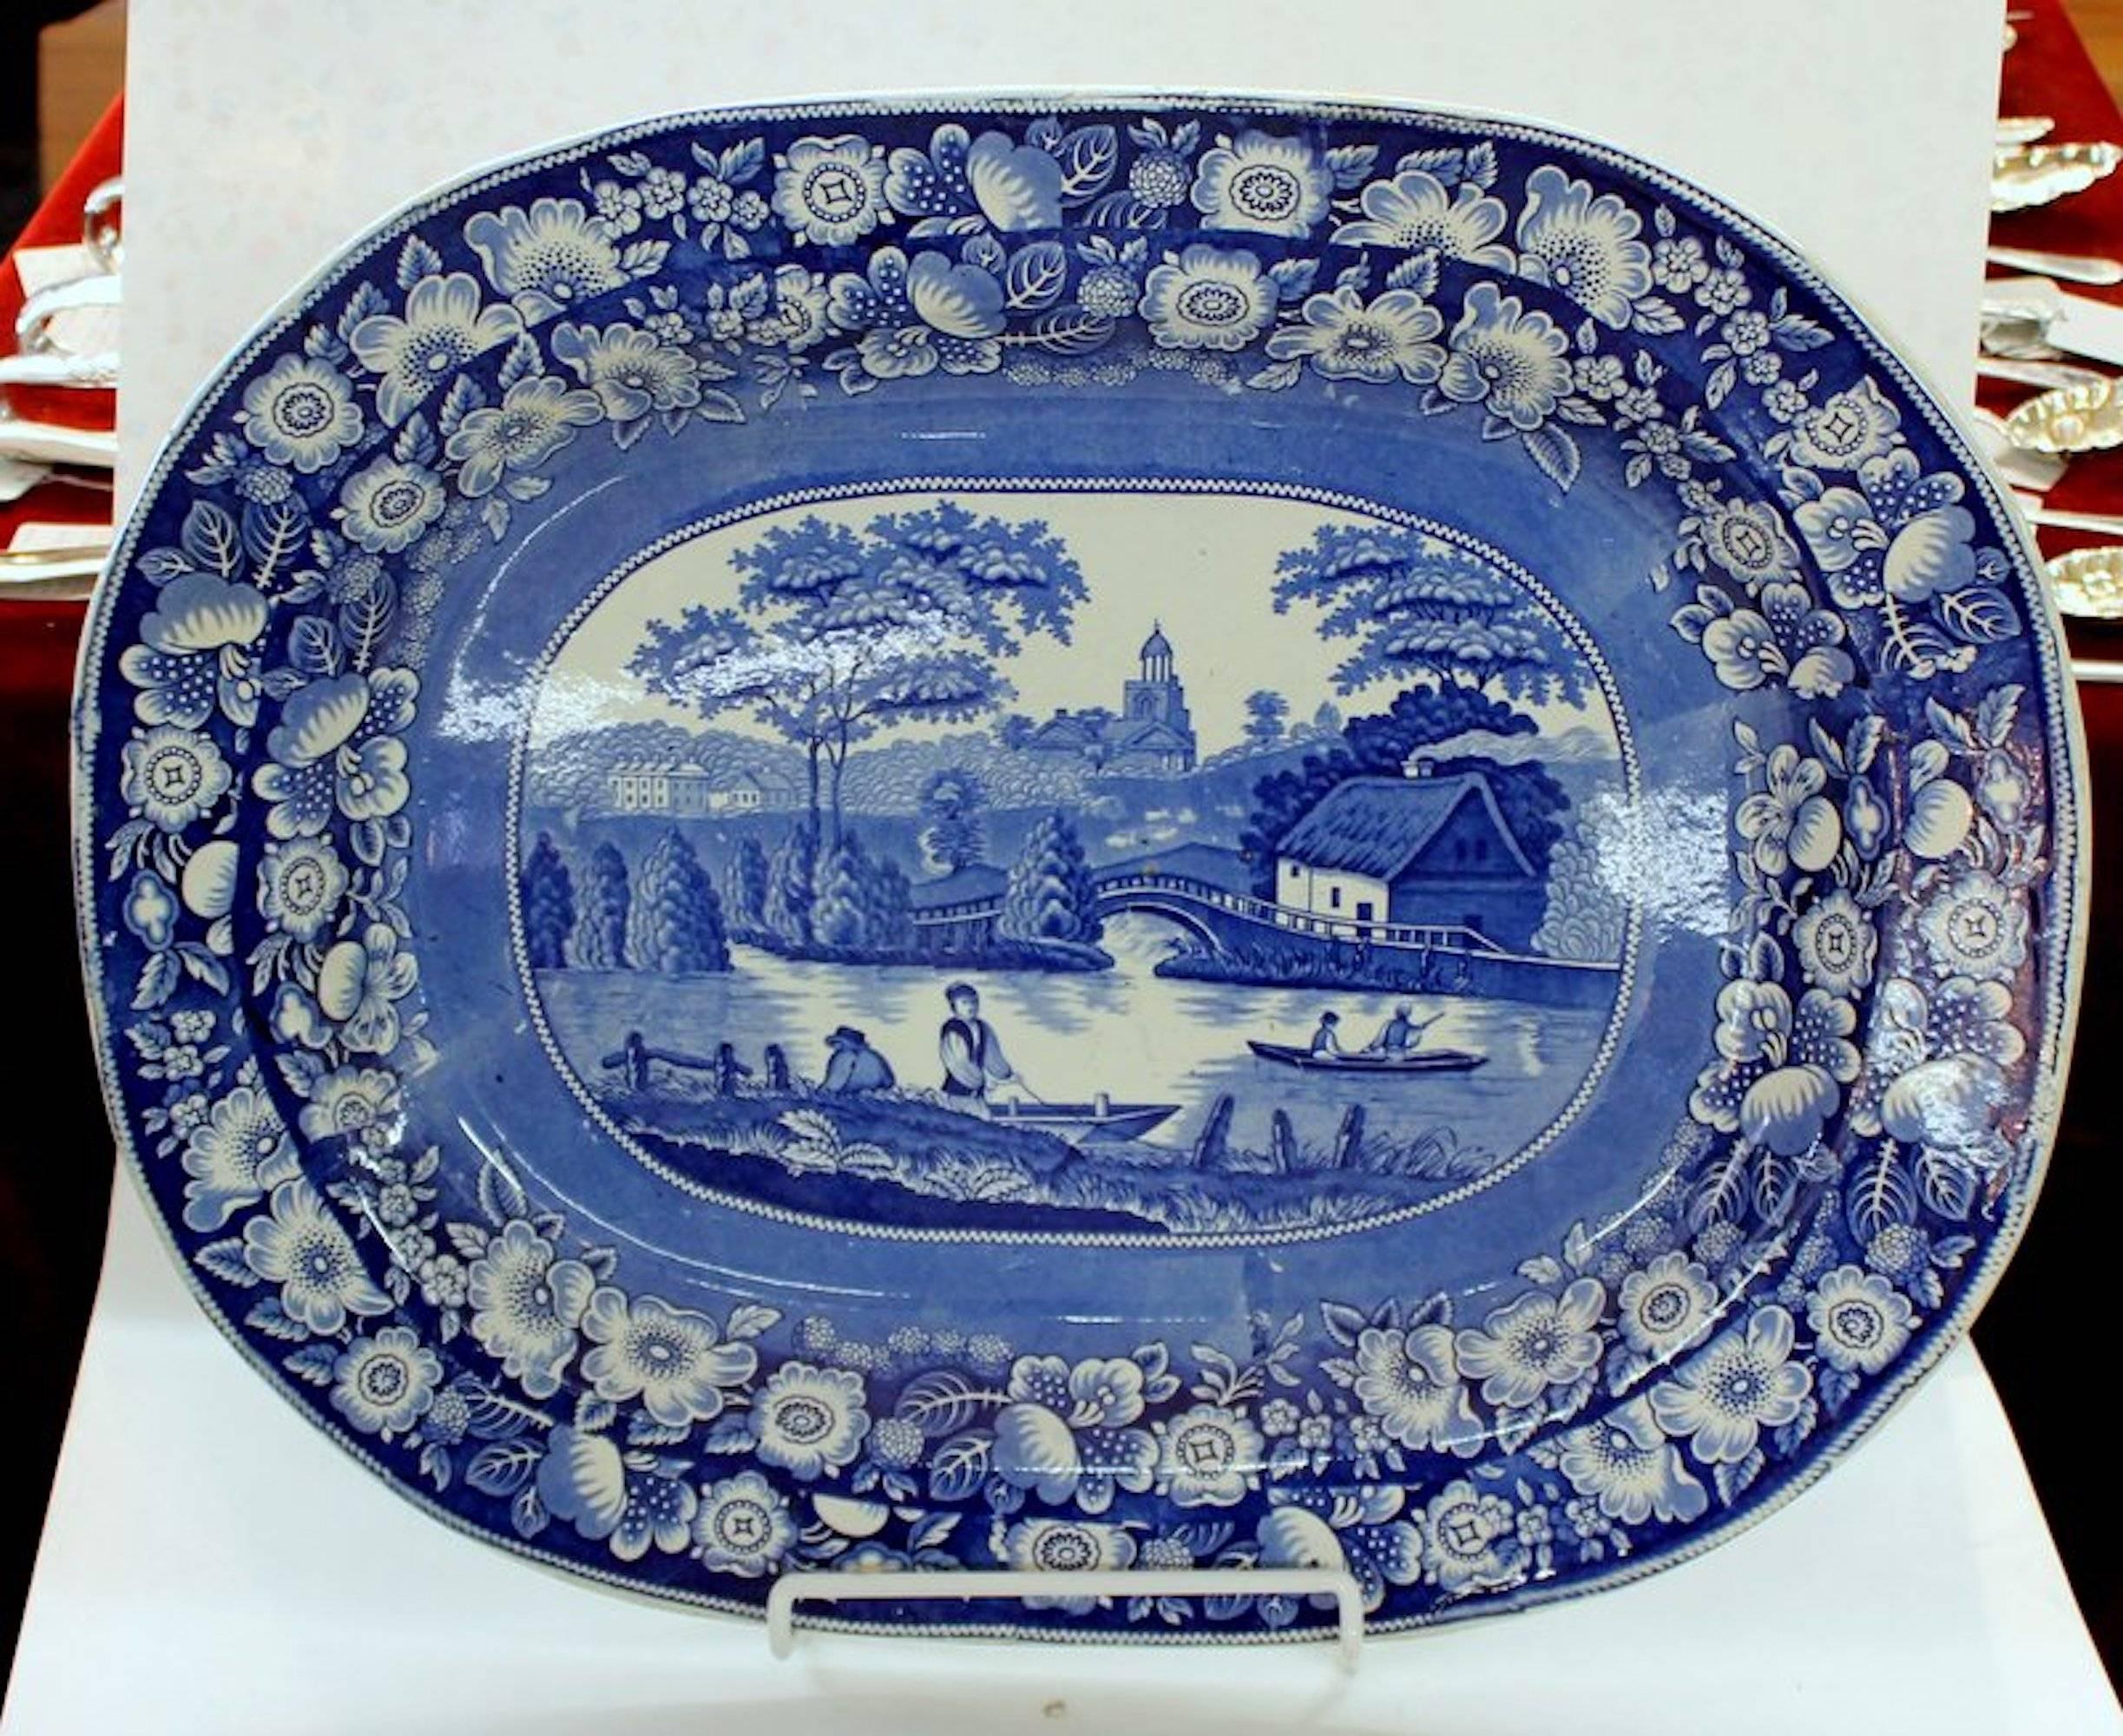 Exceptional antique English Staffordshire Earthenware B & W transferware very large platter with unidentifiable impressed maker's mark on rear. 

Unidentifiable 